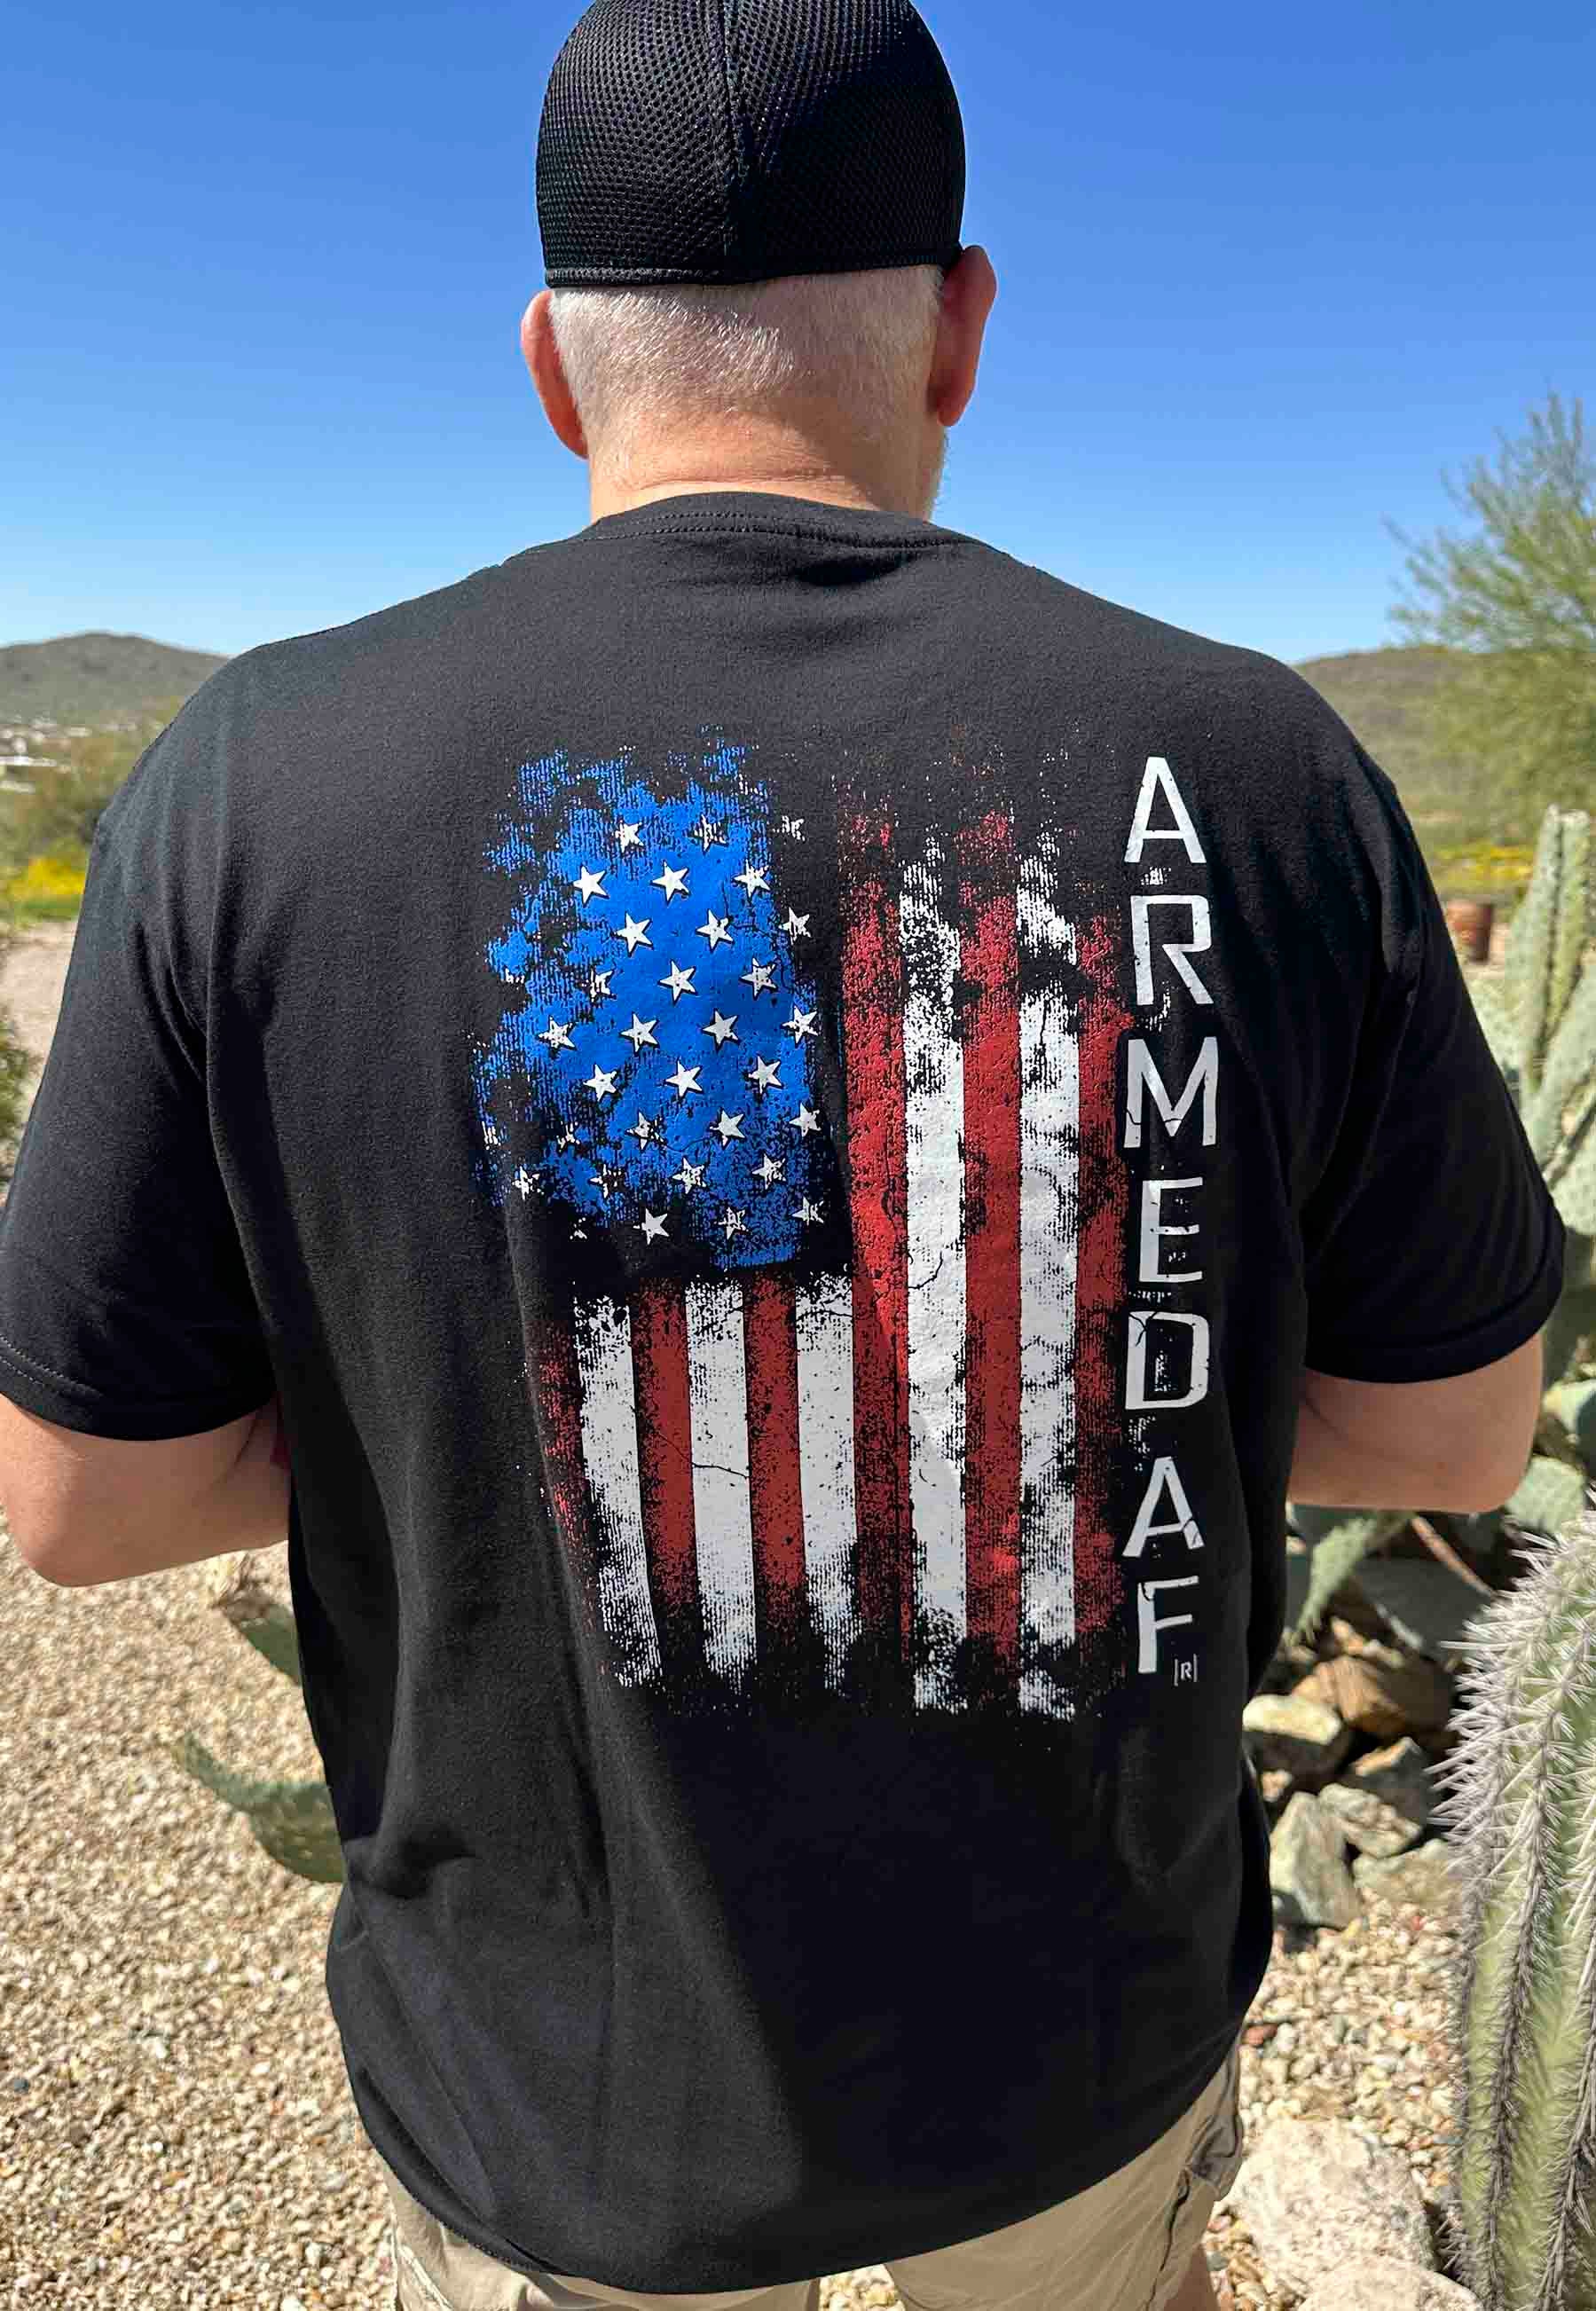 American flag t-shirt from Armed AF® brand on model